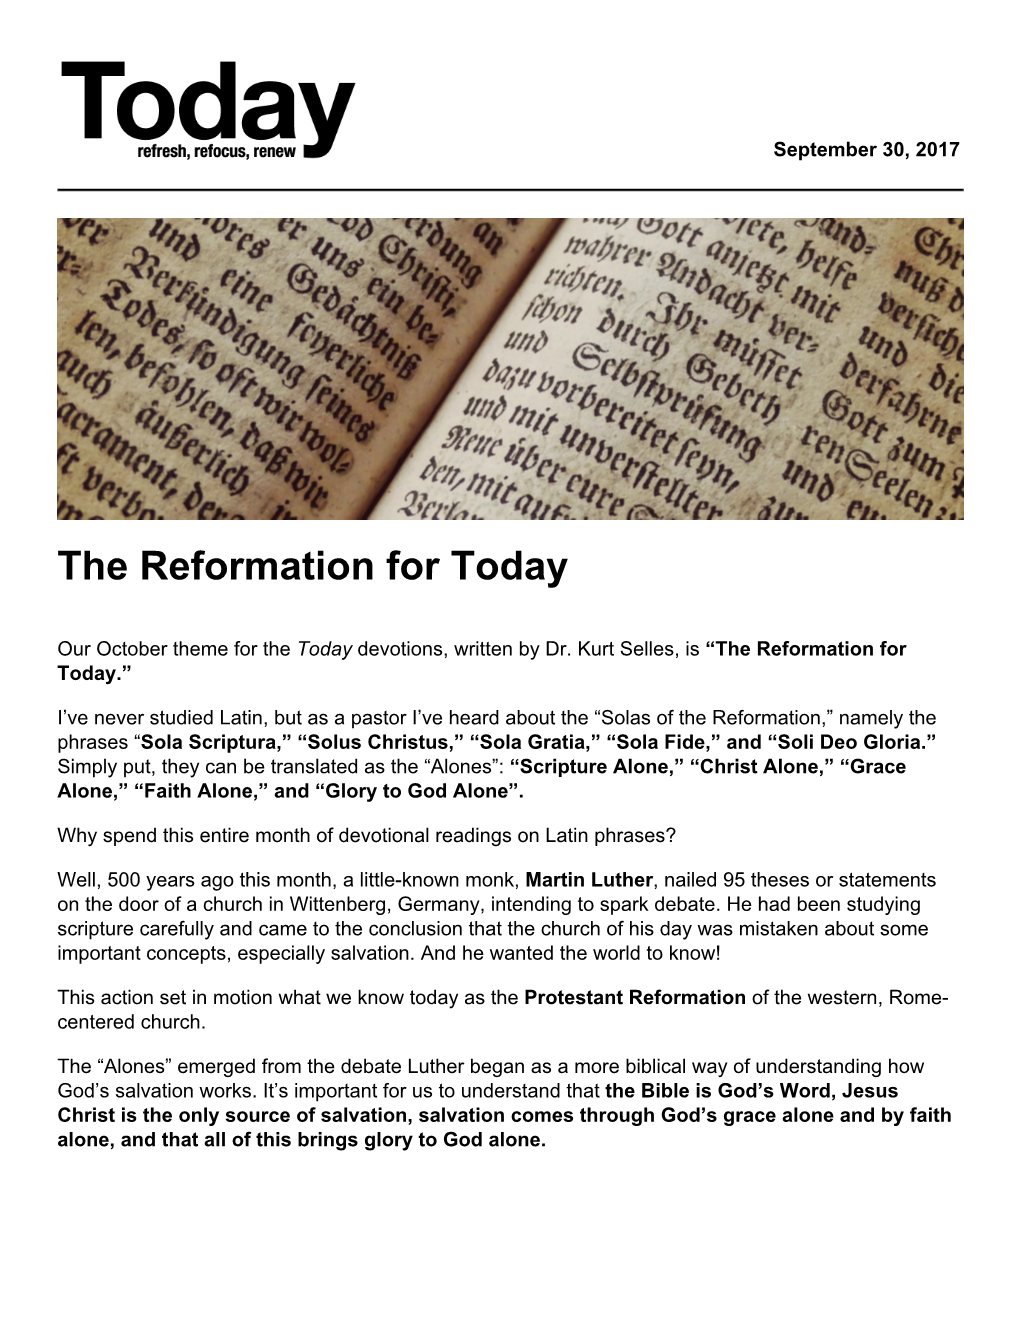 The Reformation for Today